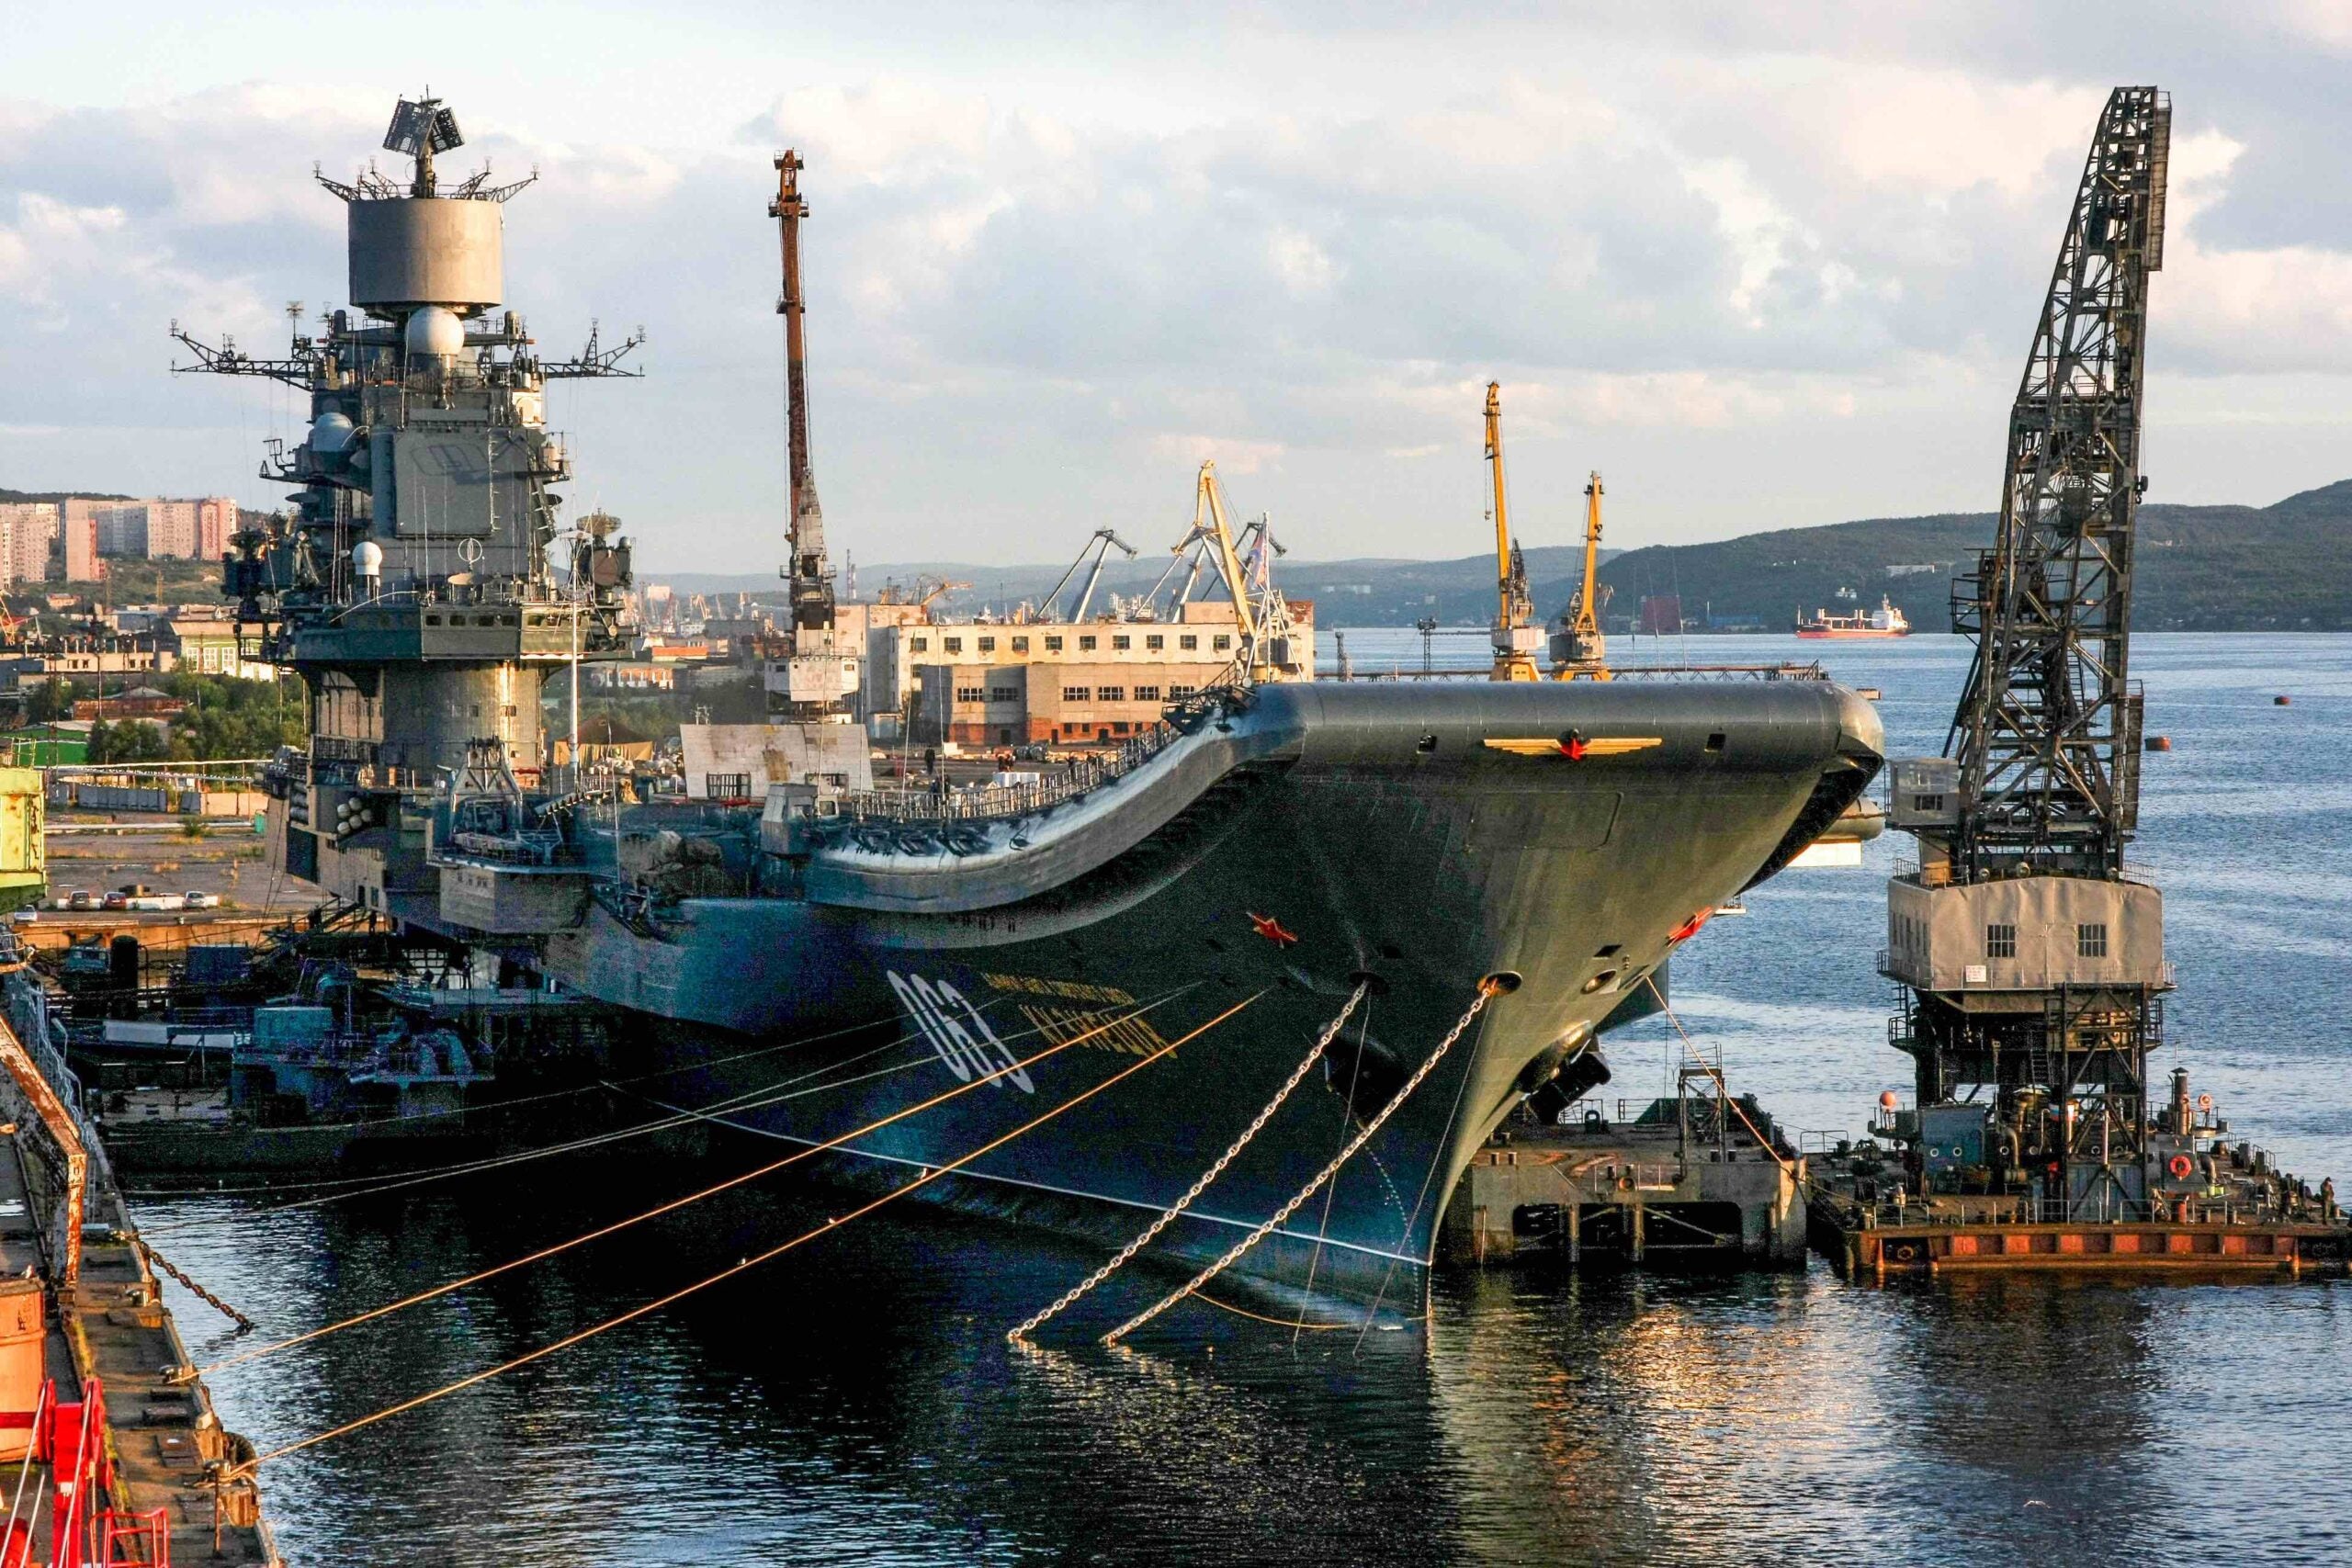 A picture taken on August 19, 2009 shows Russia's aircraft carrier Admiral Kuznetsov in Murmansk. - One person was missing and four others were injured on October 30, 2018 after a giant floating dock carrying Russia's only aircraft carrier Admiral Kuznetsov sunk at a shipyard near Russia's Arctic city Murmansk. The PD-50 floating dock -- one of the largest in the world and the largest in Russia -- sunk in the night of October 29, 2018 to October 30, 2018 after two cranes fell on it while the Soviet-era warship was undergoing repairs, local media reported. (Photo by Vasily MAXIMOV / AFP)        (Photo credit should read VASILY MAXIMOV/AFP via Getty Images)